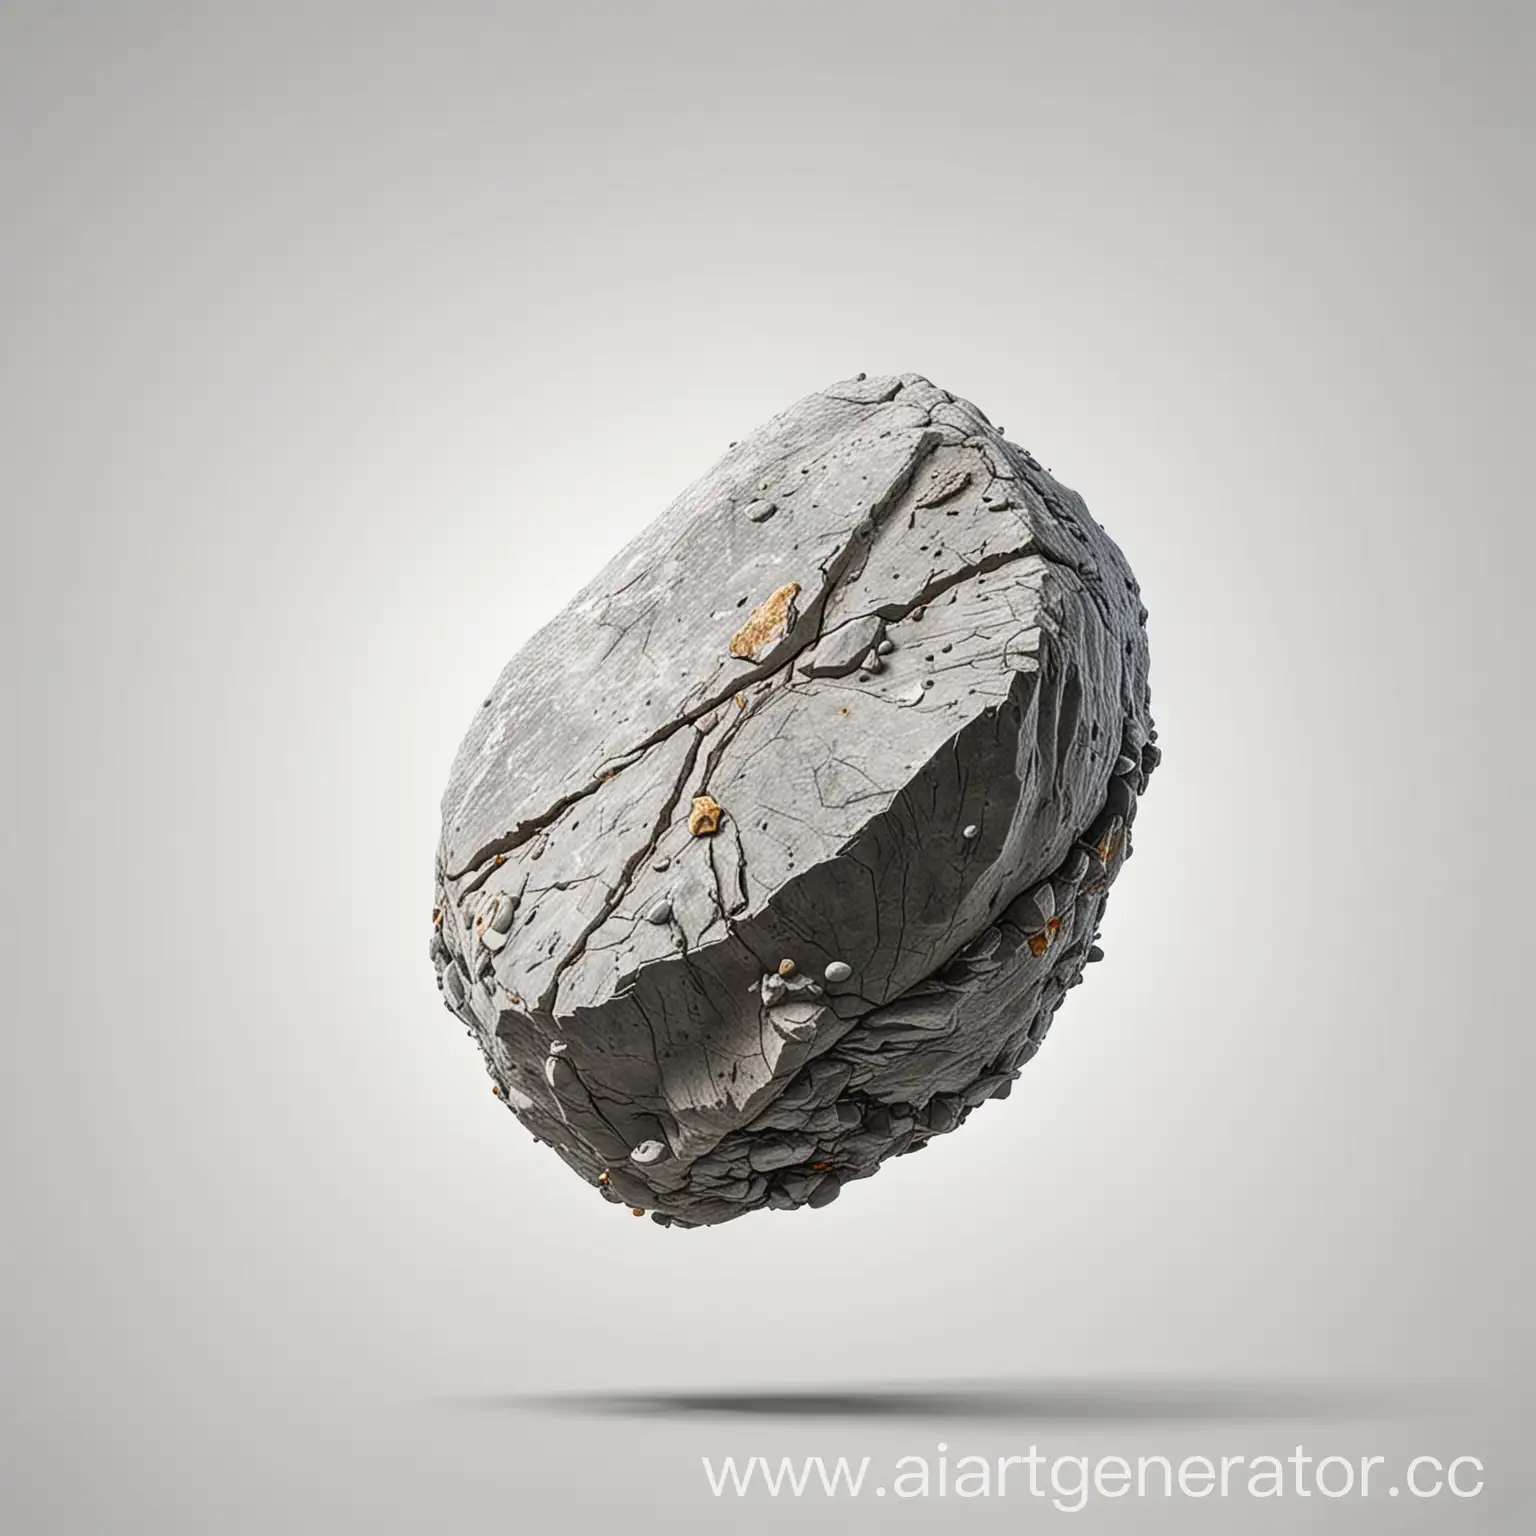 hyper realistic one stone flying on white background